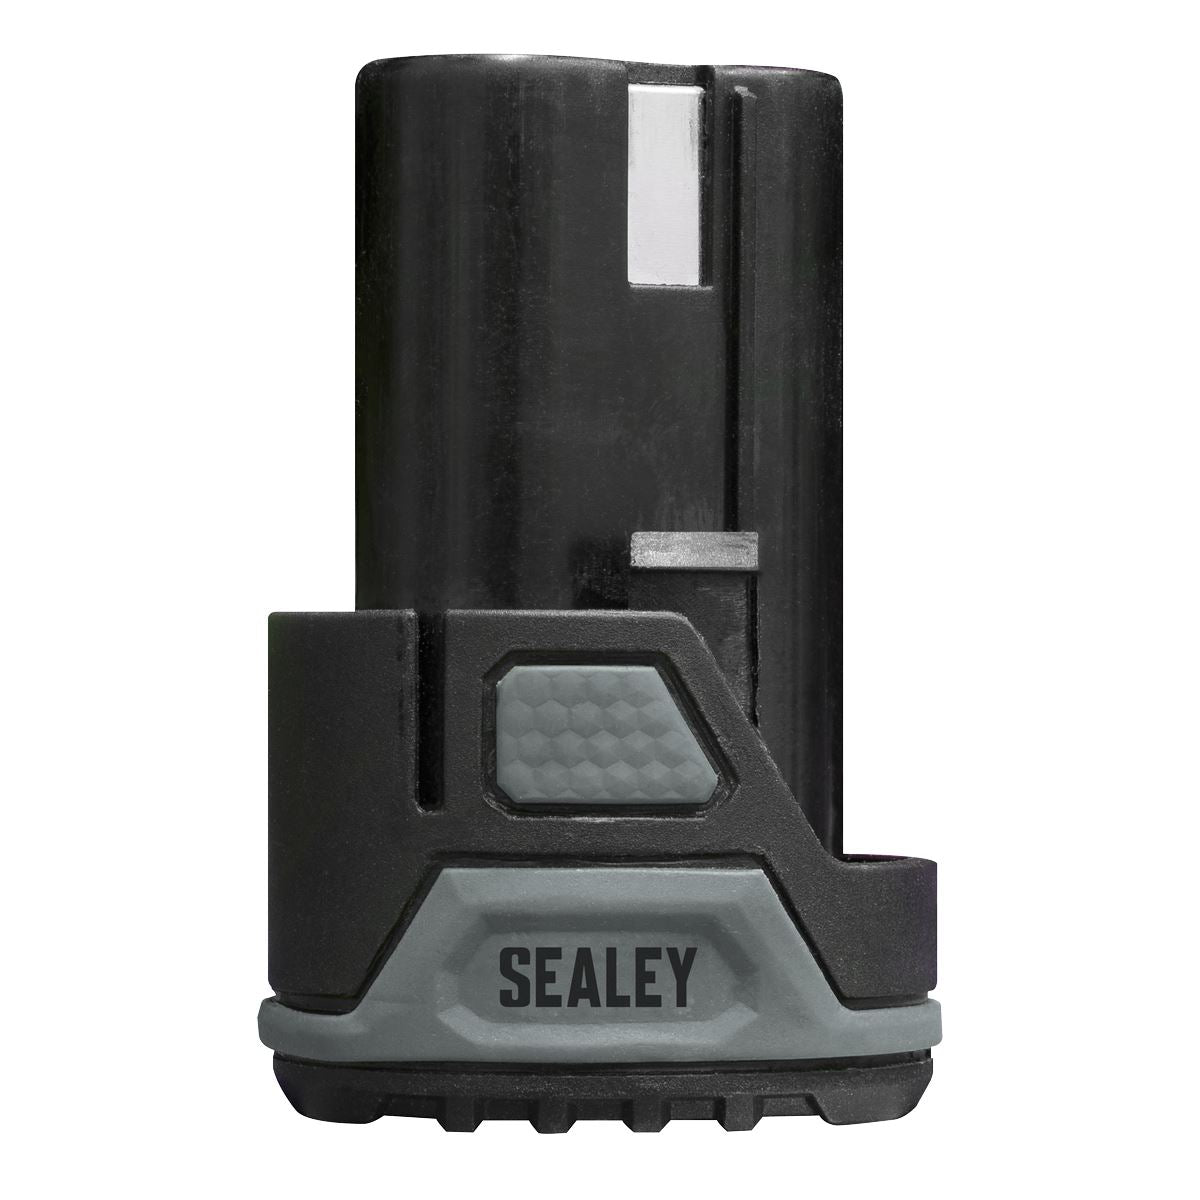 Sealey Power Tool Battery 10.8V 2Ah Lithium-ion for SV10.8 Series